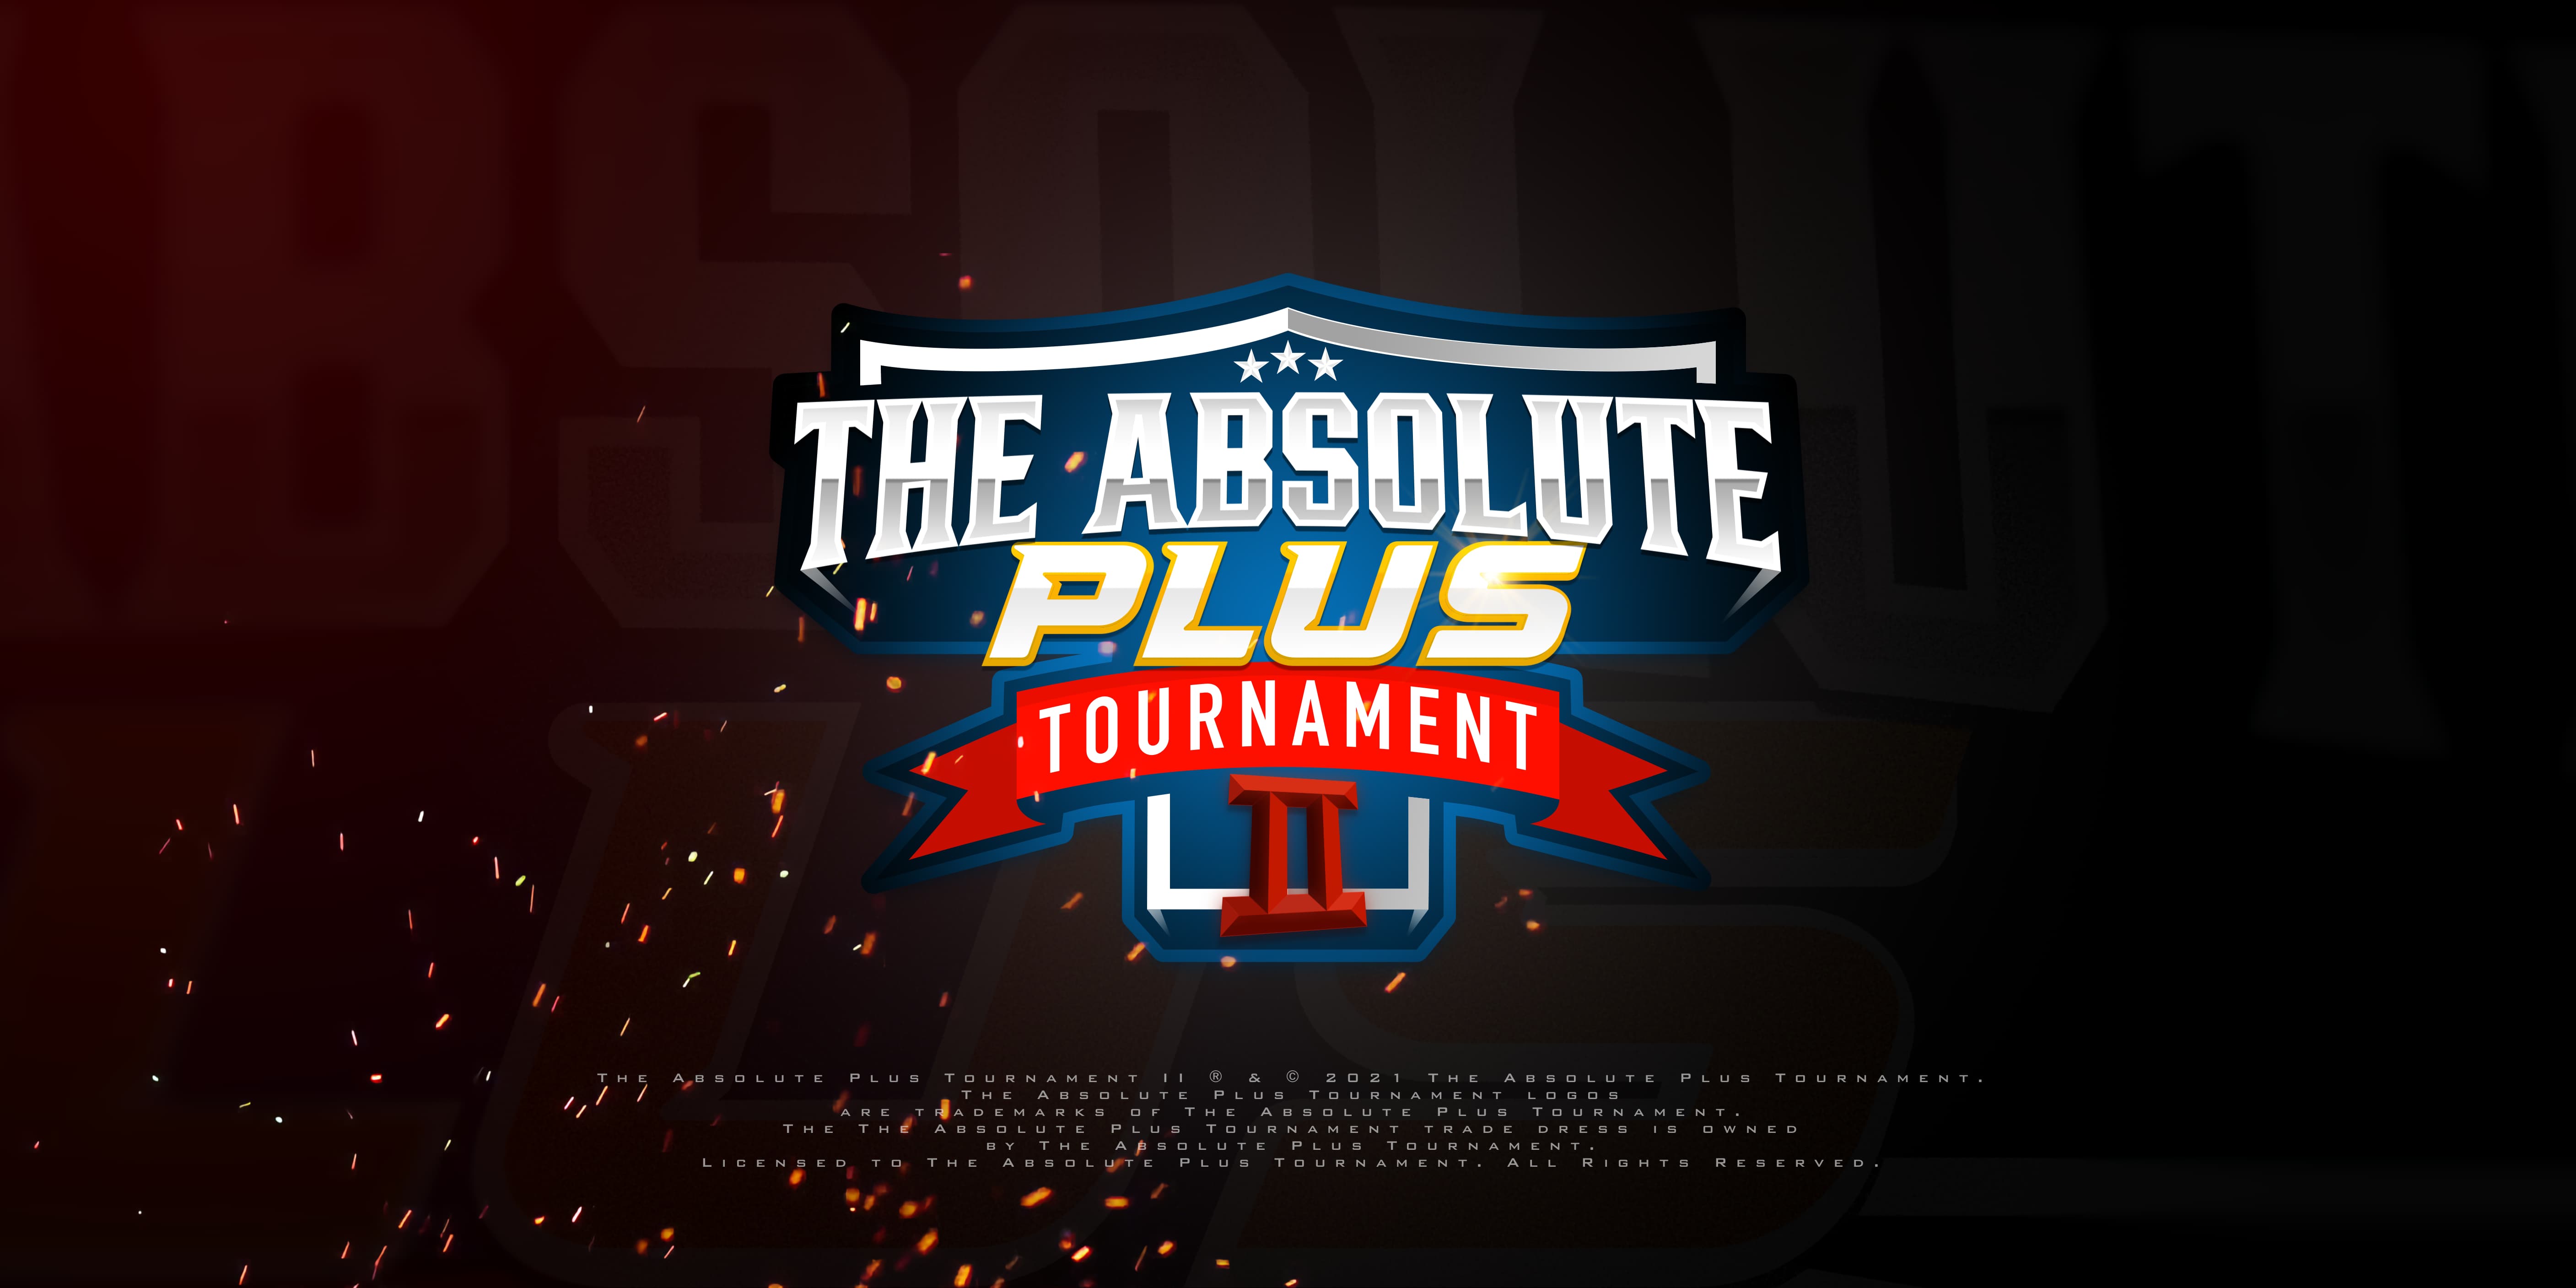 Logo of The Absolute Tournament PLUS 2, over a darkish styalized background, and sparks partially covering the image. Text below the logo reads: 'The Absolute Plus Tournament II ® & © 2021 The Absolute Plus Tournament. The Absolute Plus Tournament logos are trademarks of The Absolute Plus Tournament.
The The Absolute Plus Tournament trade dress is owned by The Absolute Plust Tournament. Licensed to The Absolute Plus Tournament. All Rights Reserved.'